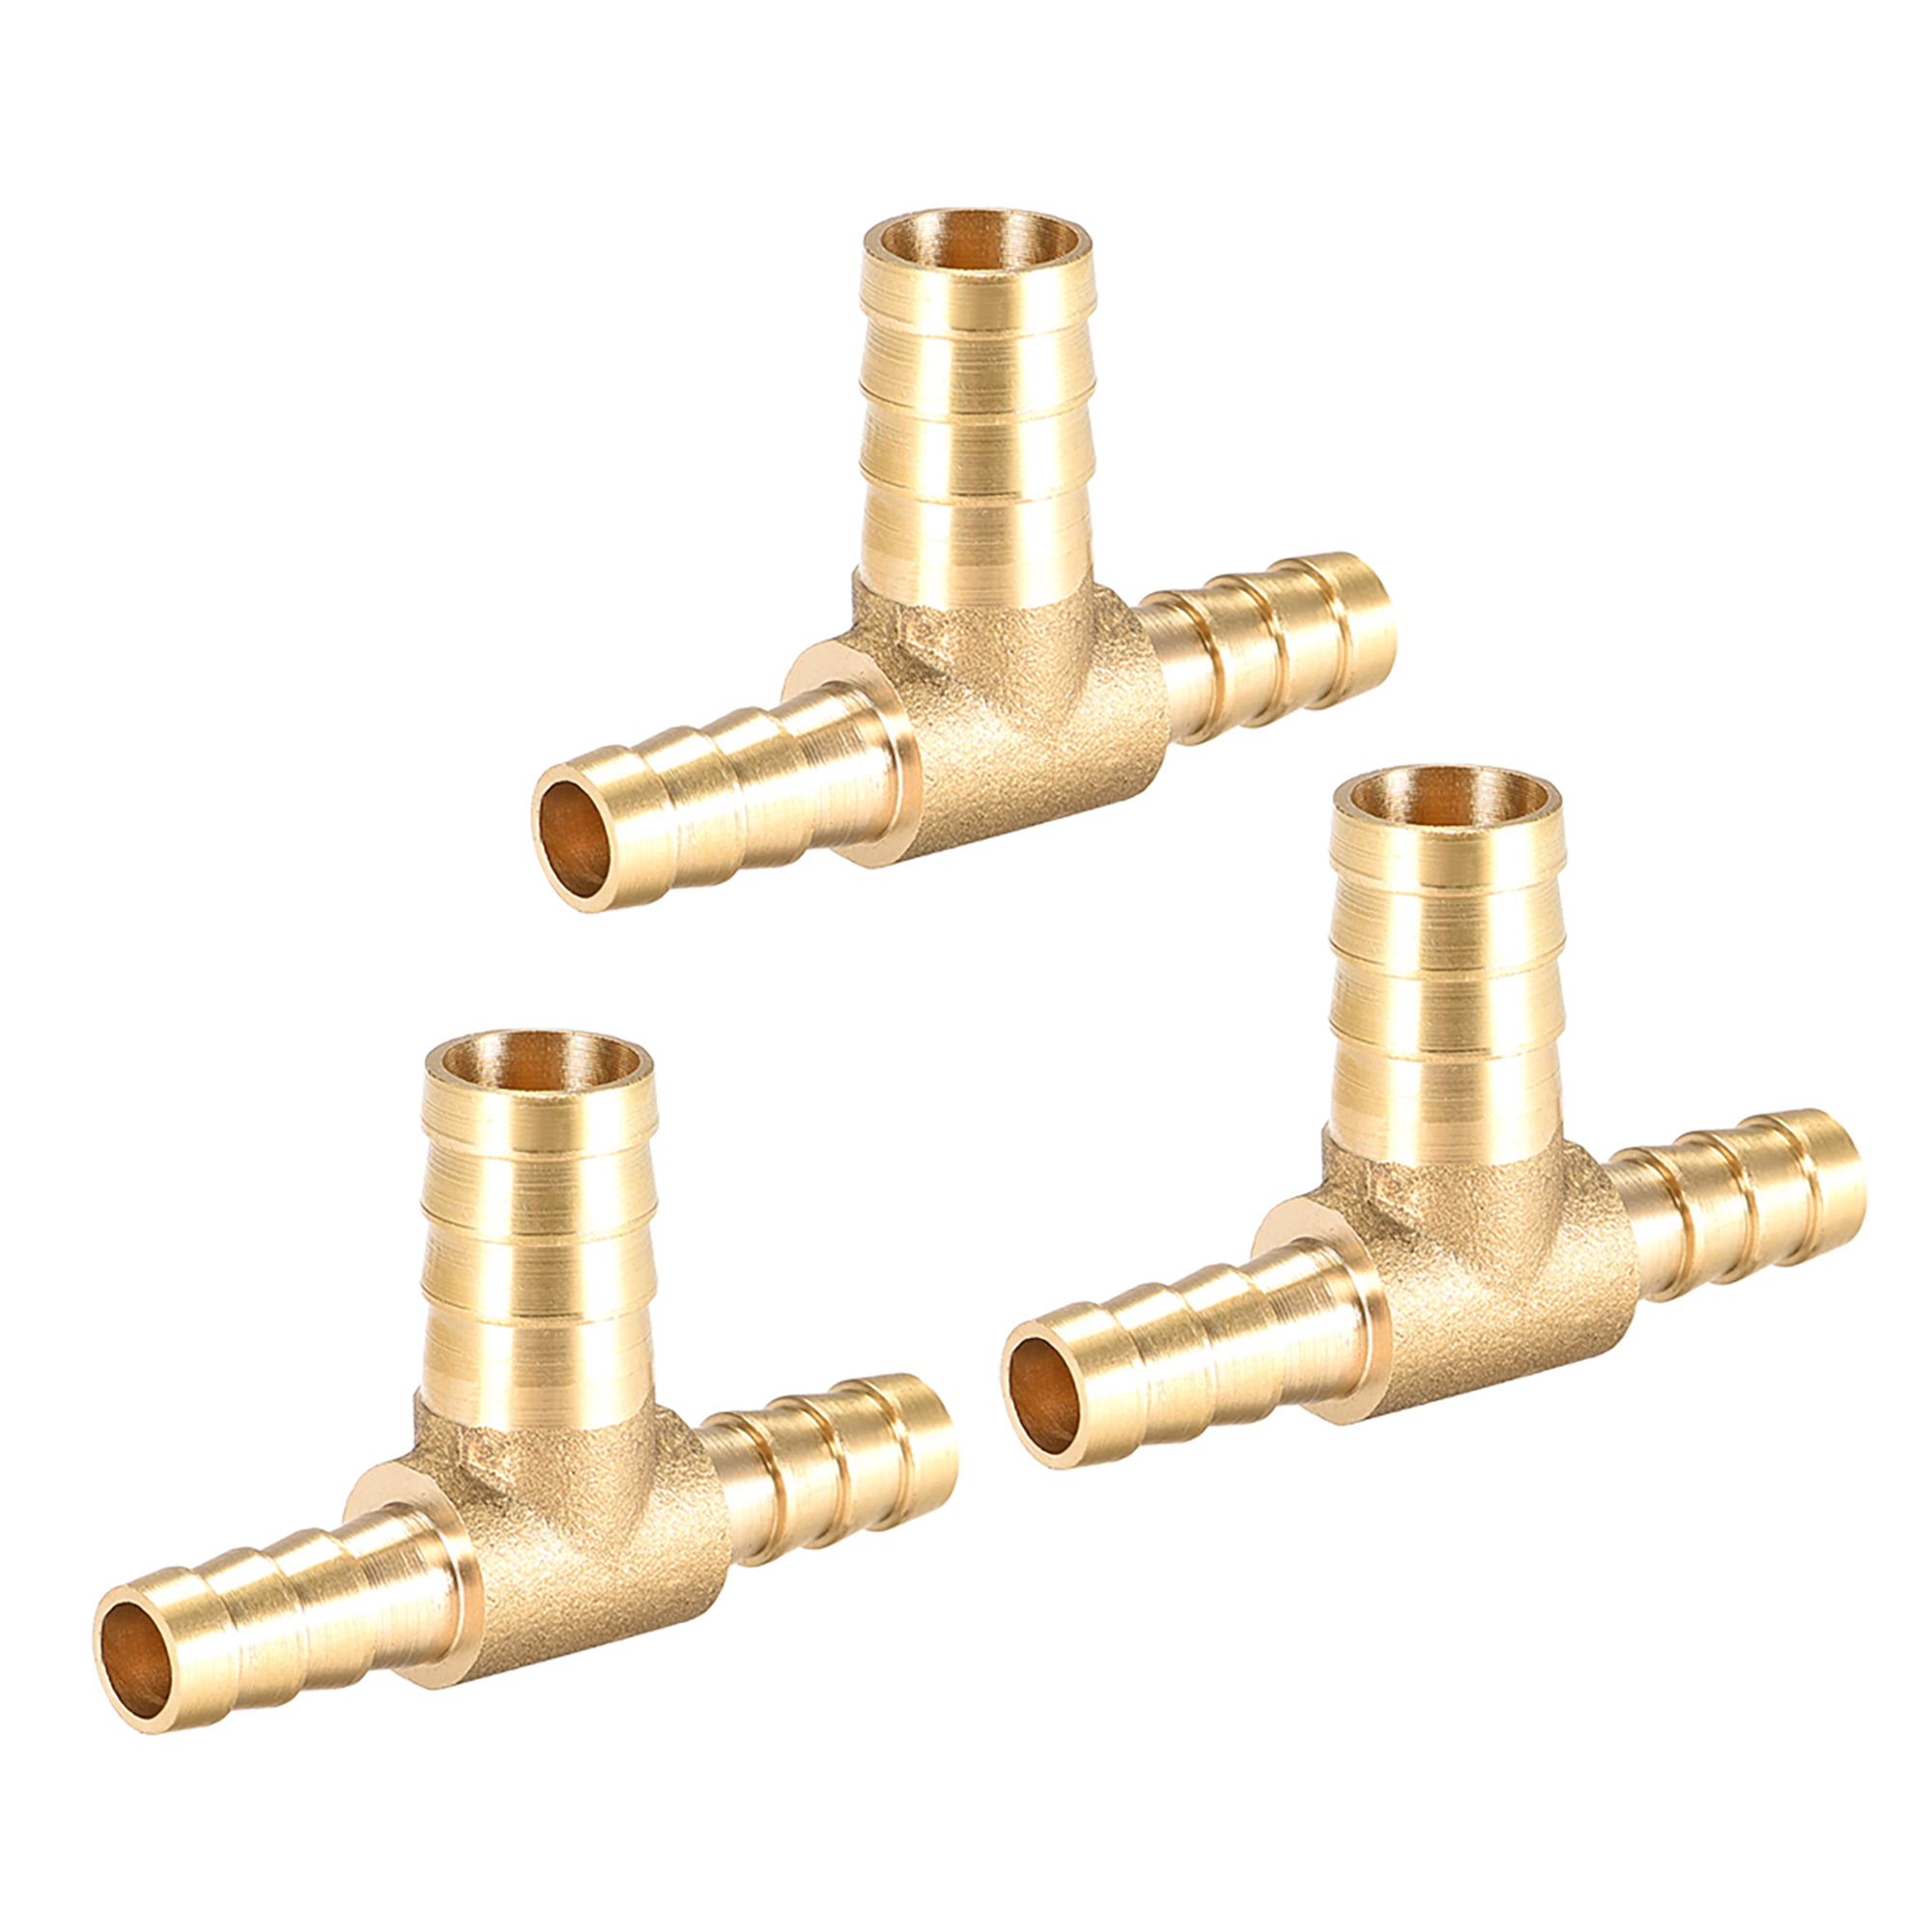 12mm-8mm-12mm Y 3Way Brass Fitting Hose Barb Reducing Fuel to <1/2" 5/16" Splice 